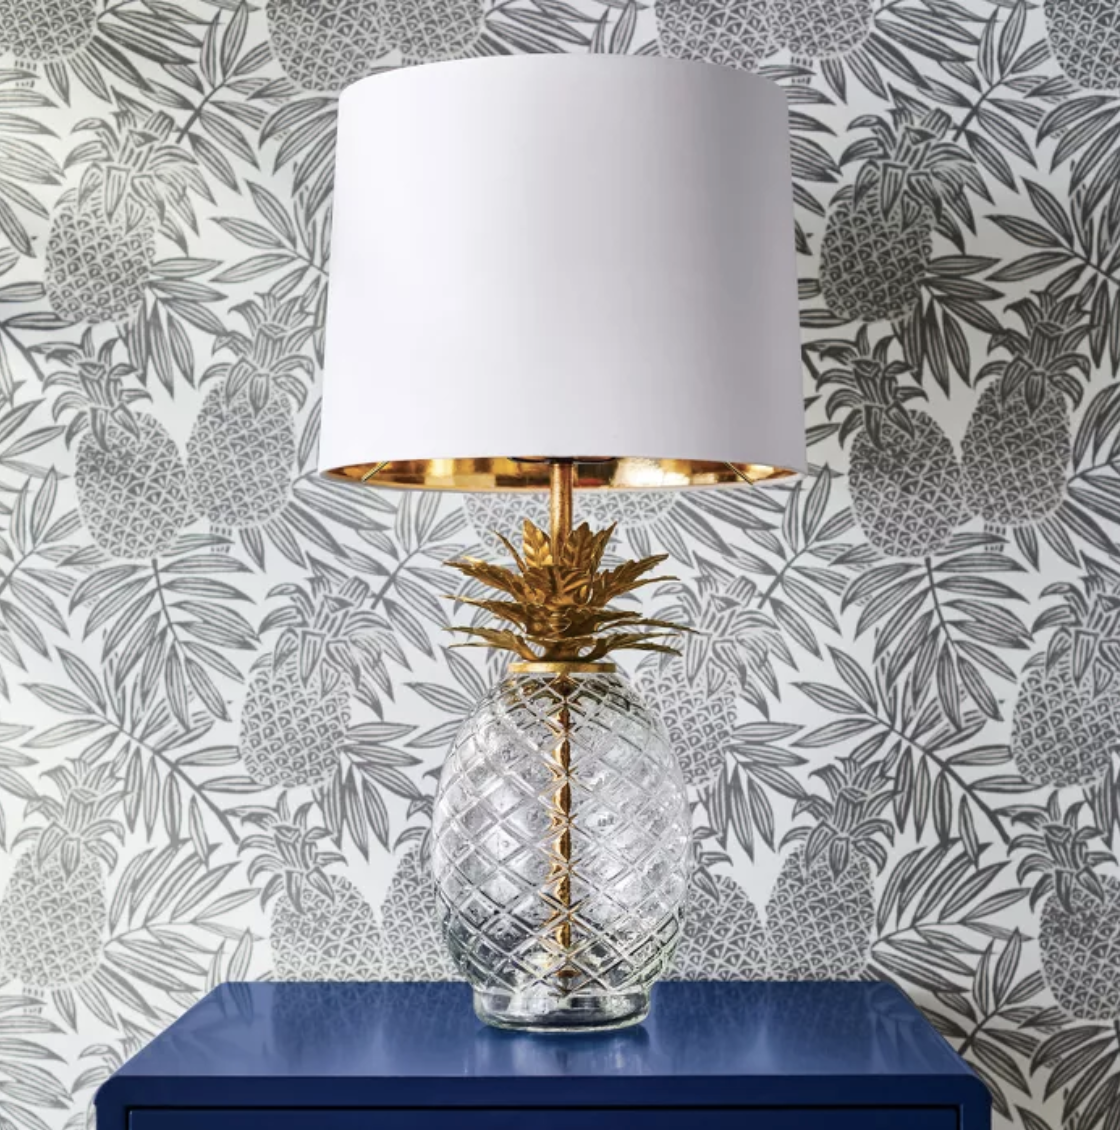 Brown and white pineapple wallpaper behind pineapple lamp and blue table